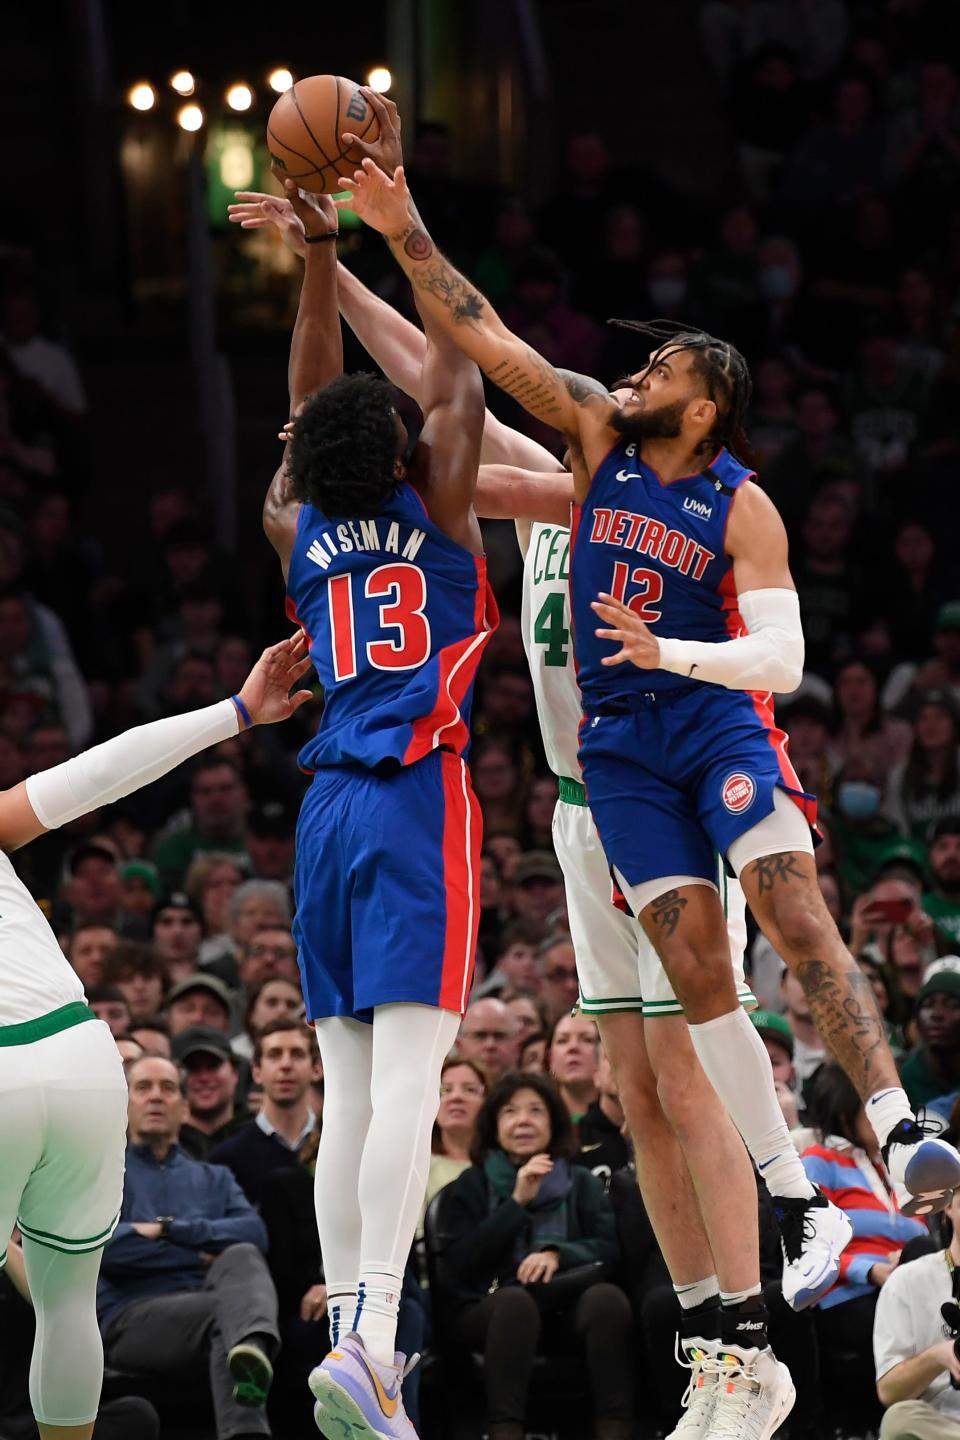 Detroit Pistons center James Wiseman and forward Isaiah Livers battle the Boston Celtics for the ball during the first half at TD Garden  in Boston, Feb. 15, 2023.